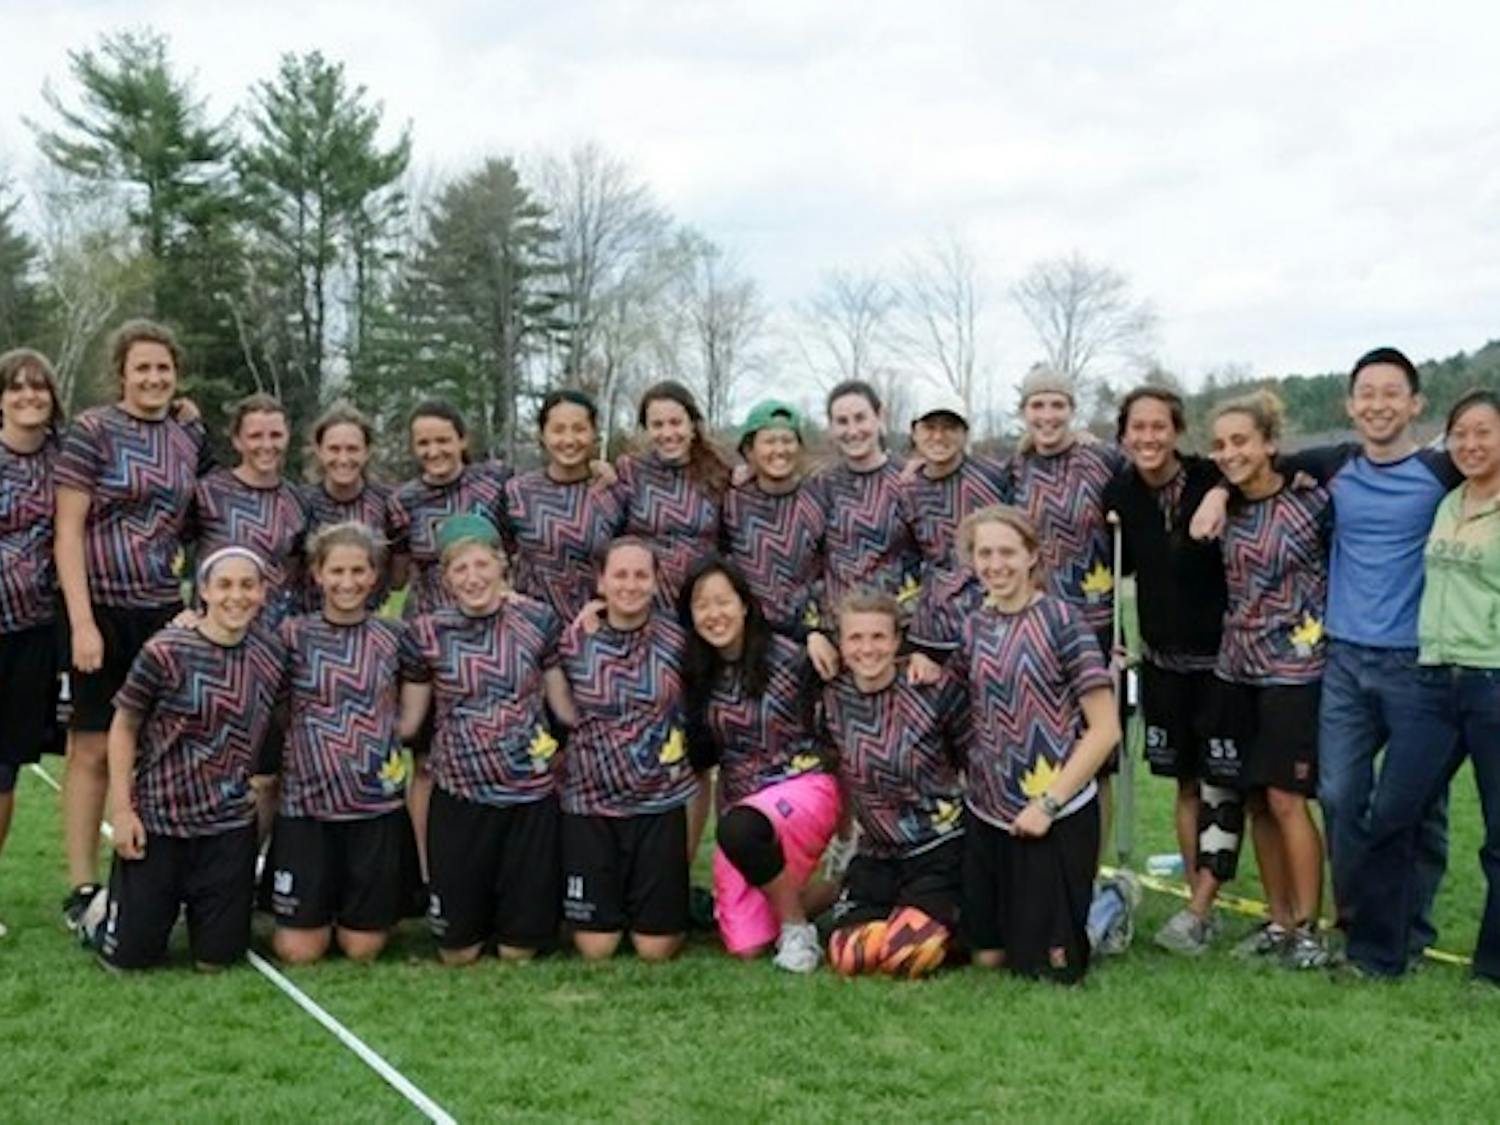 The women's Ultimate Frisbee team which calls itself Princess Layout finished in 13th place at nationals.